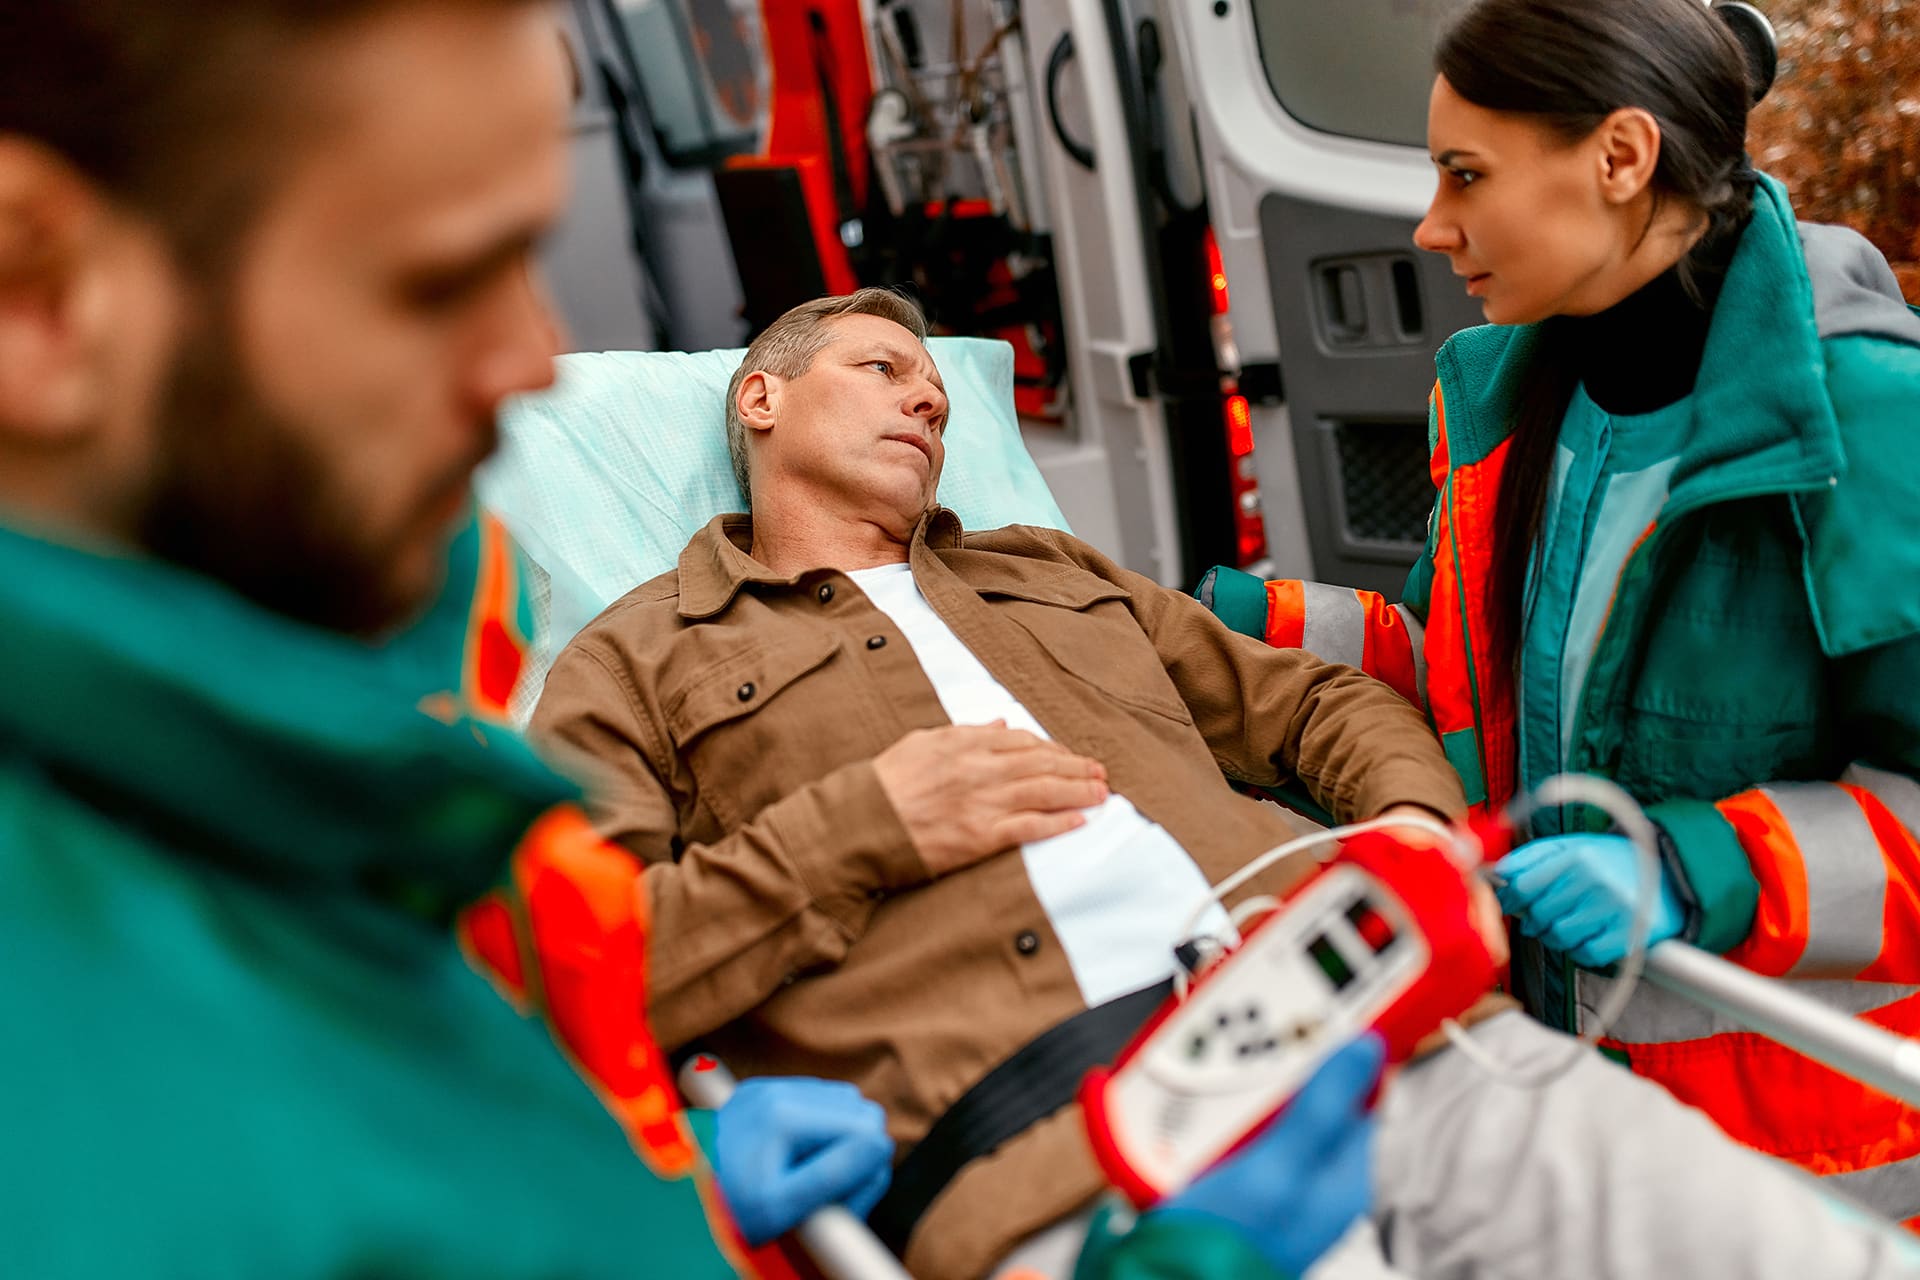 Paramedics check the level of oxygen in the blood and transport